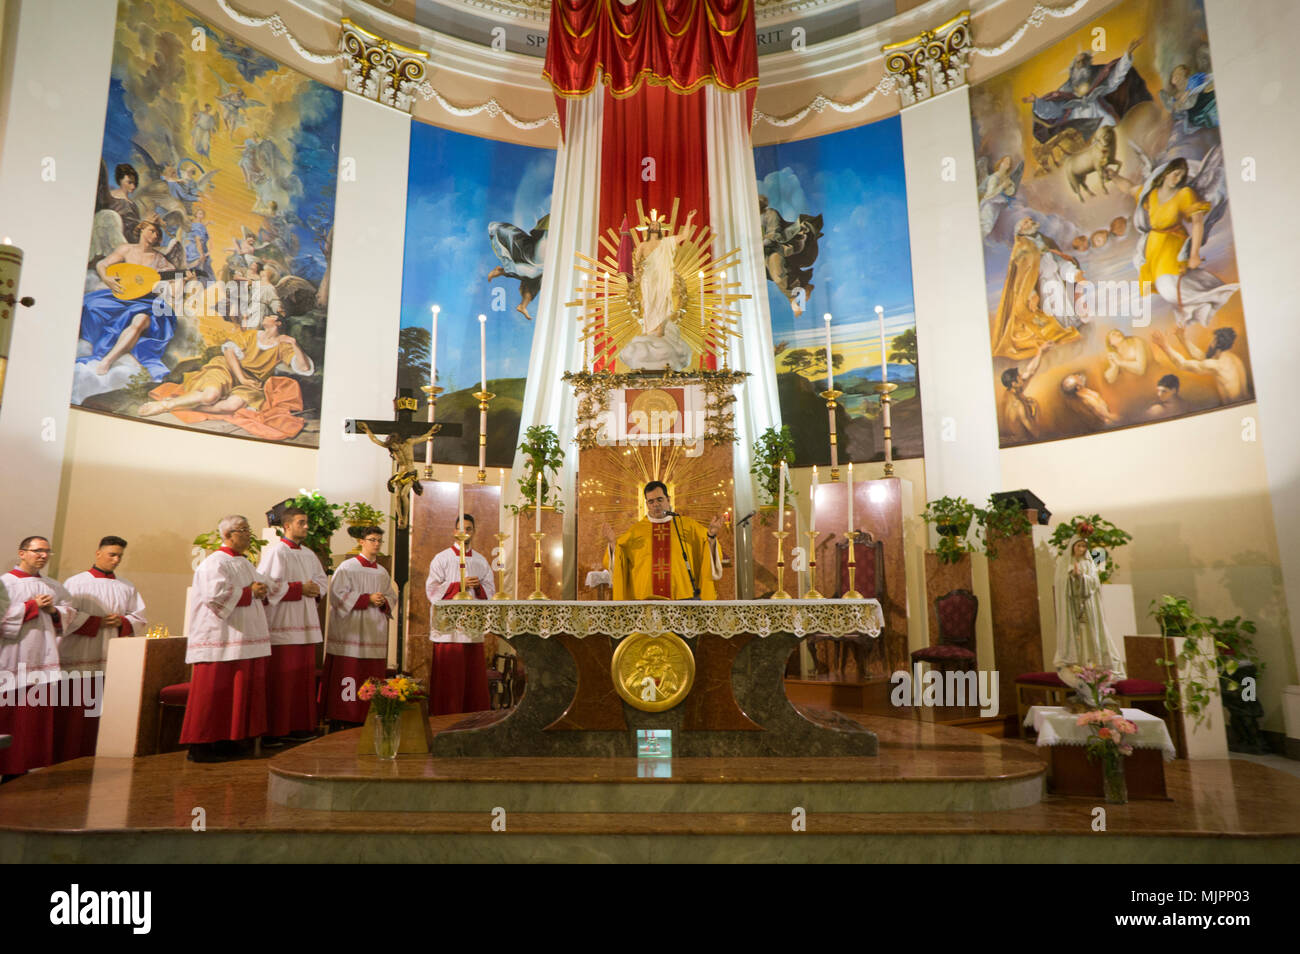 Priest celebrating Mass in a Catholic church in Palermo, Sicily, Italy Stock Photo